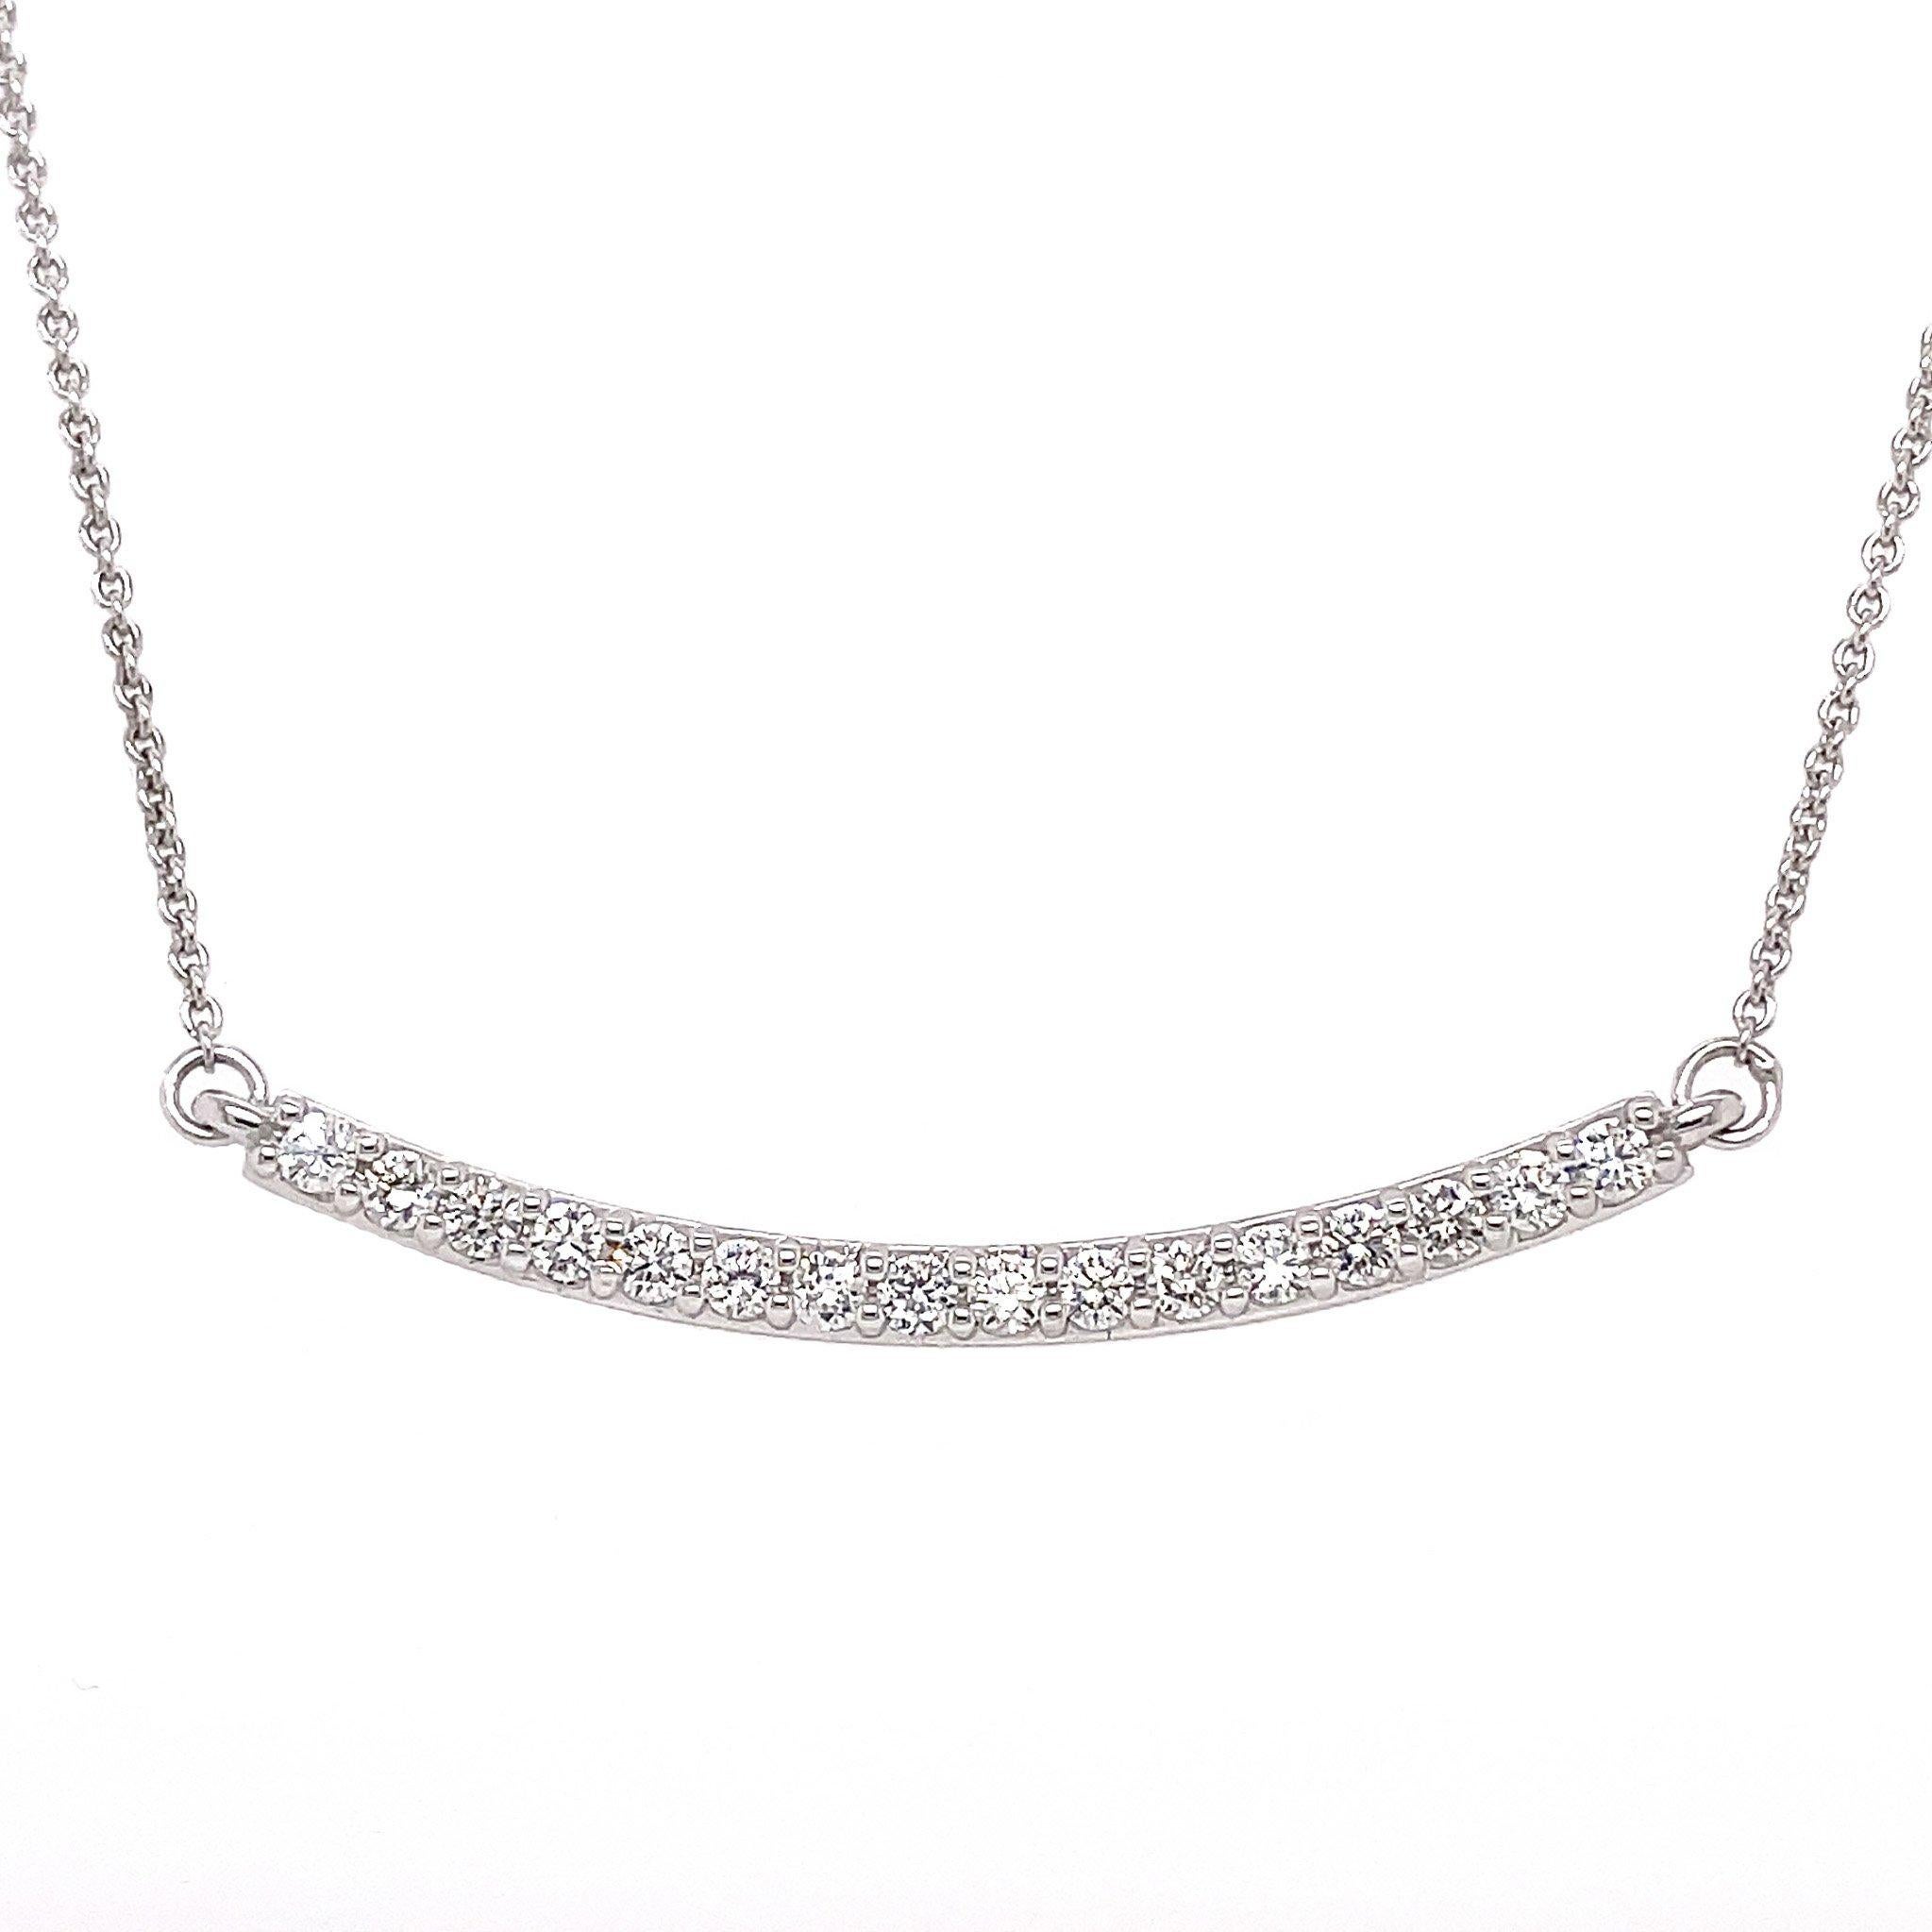 Round Cut 0.48 Carat Diamond Pave Bar Pendant Necklace in 14K White Gold on Chain For Sale